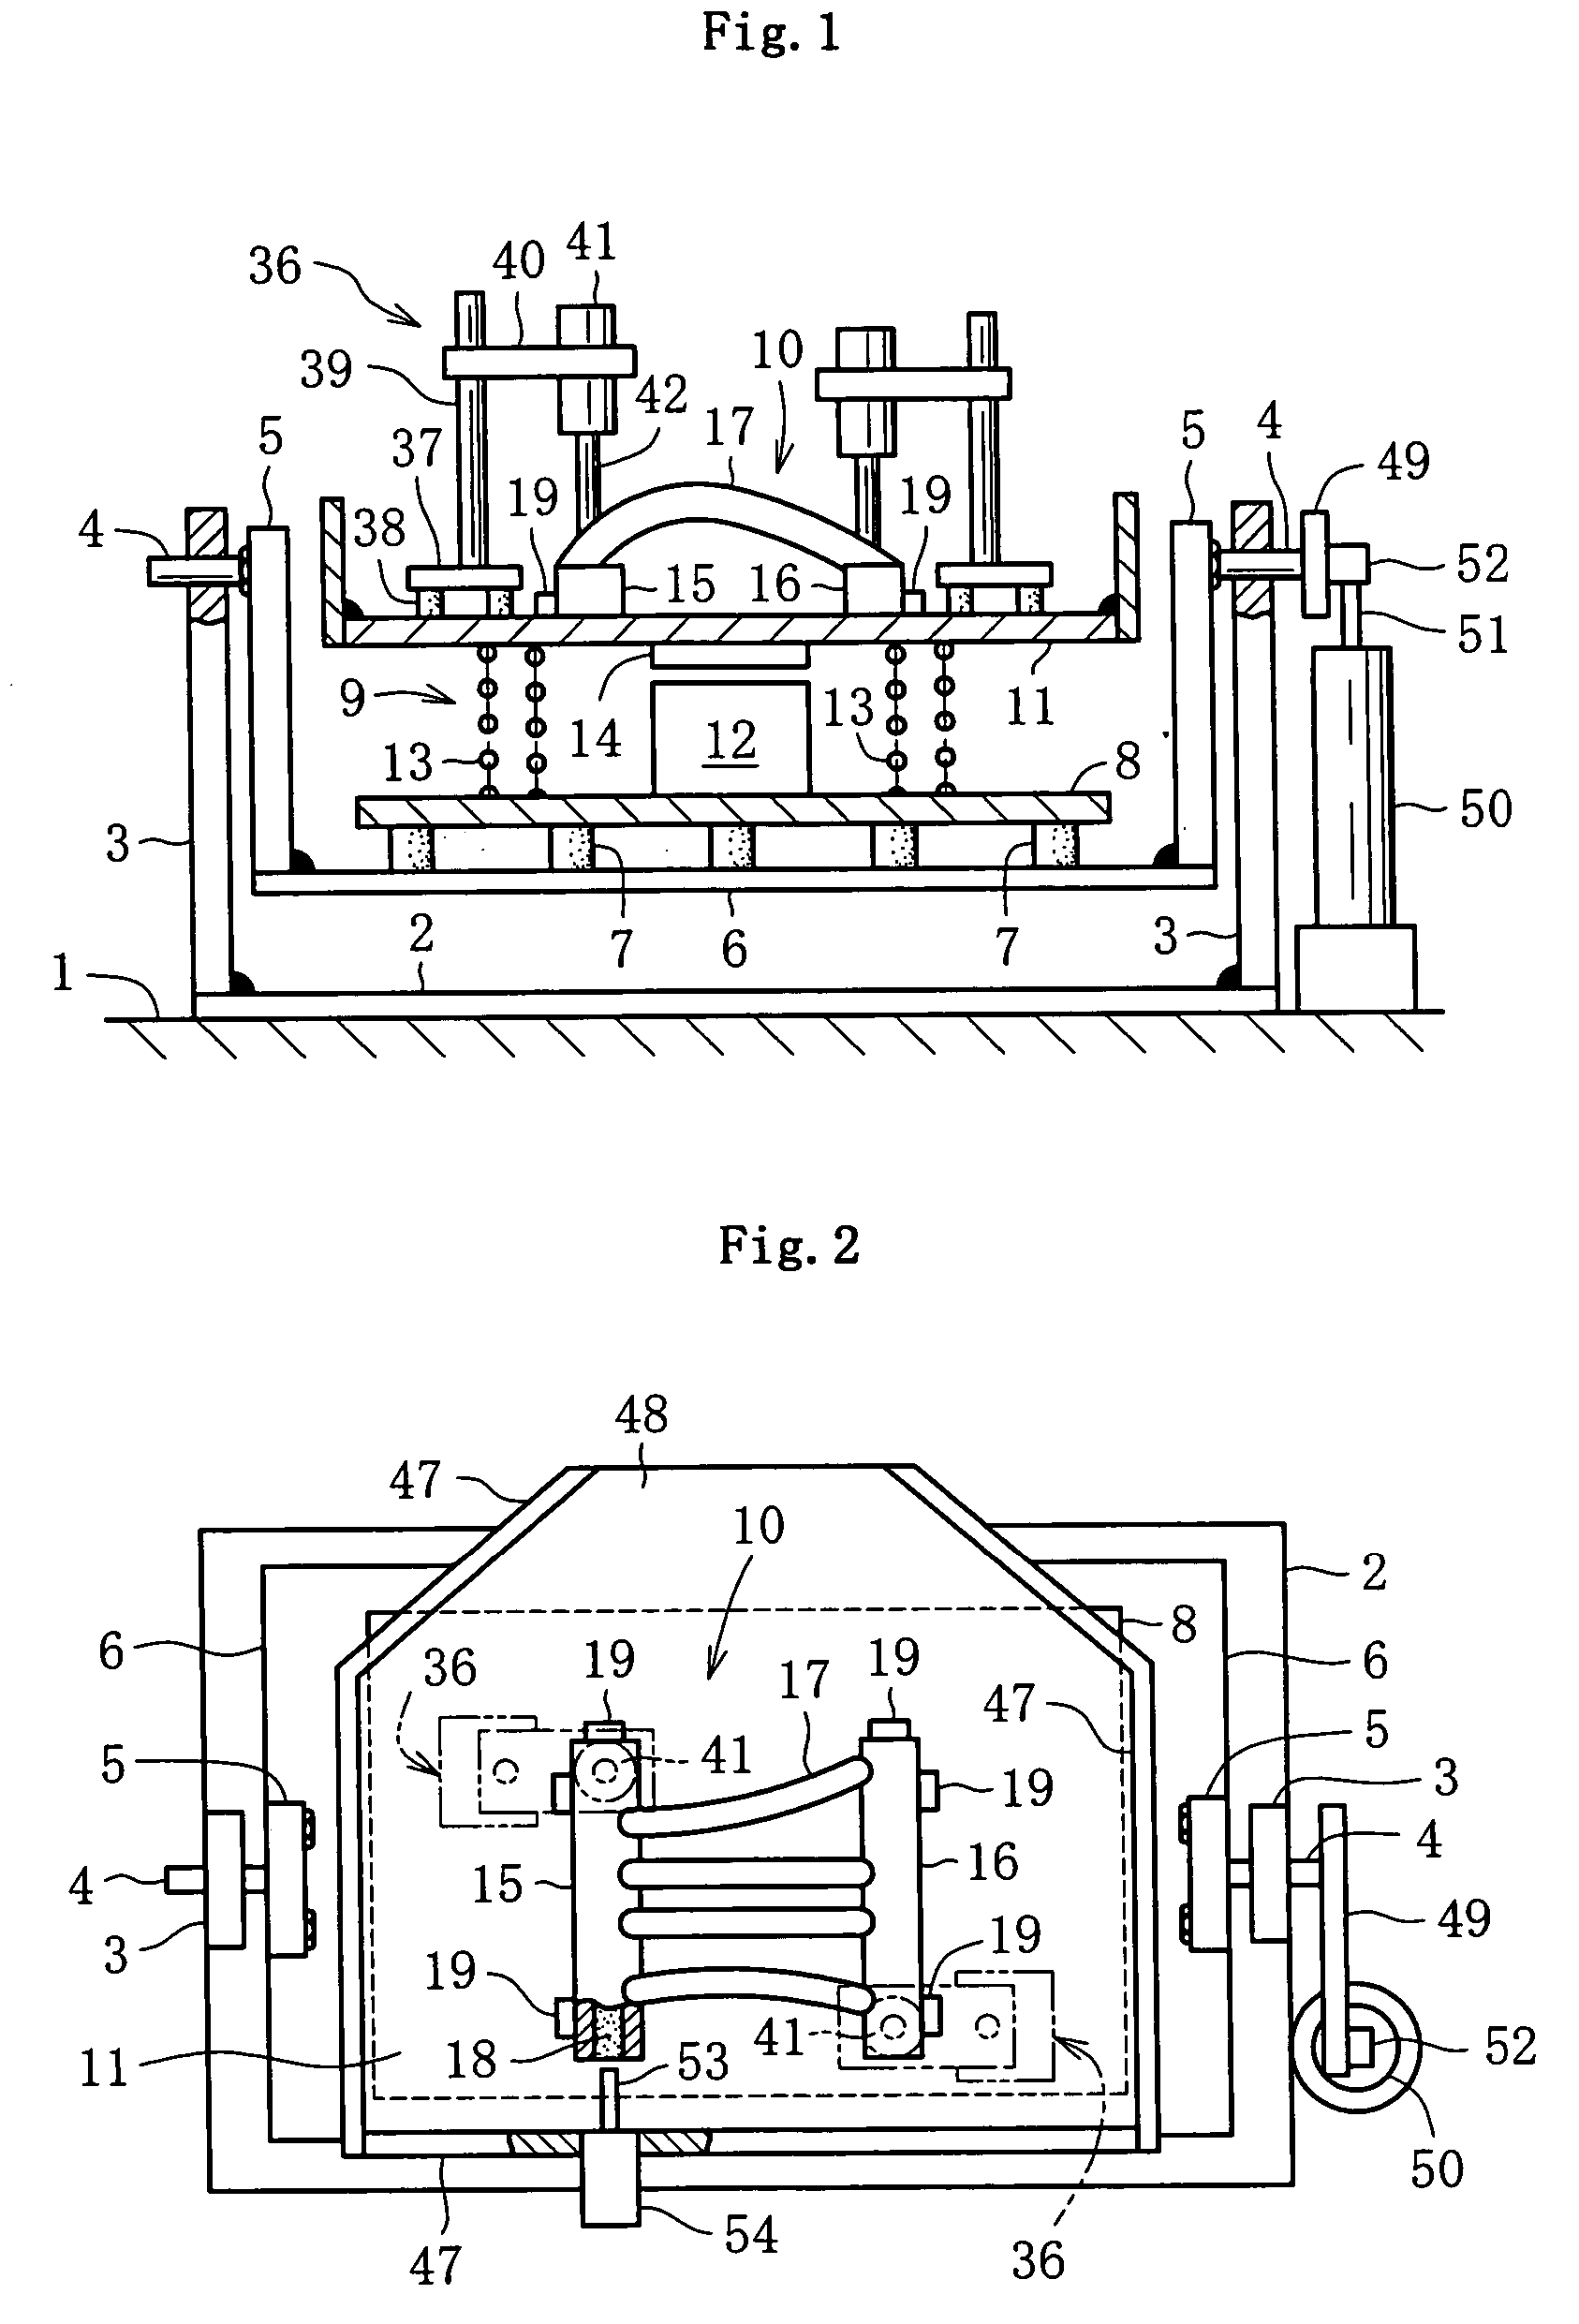 Device for removing sand from casting